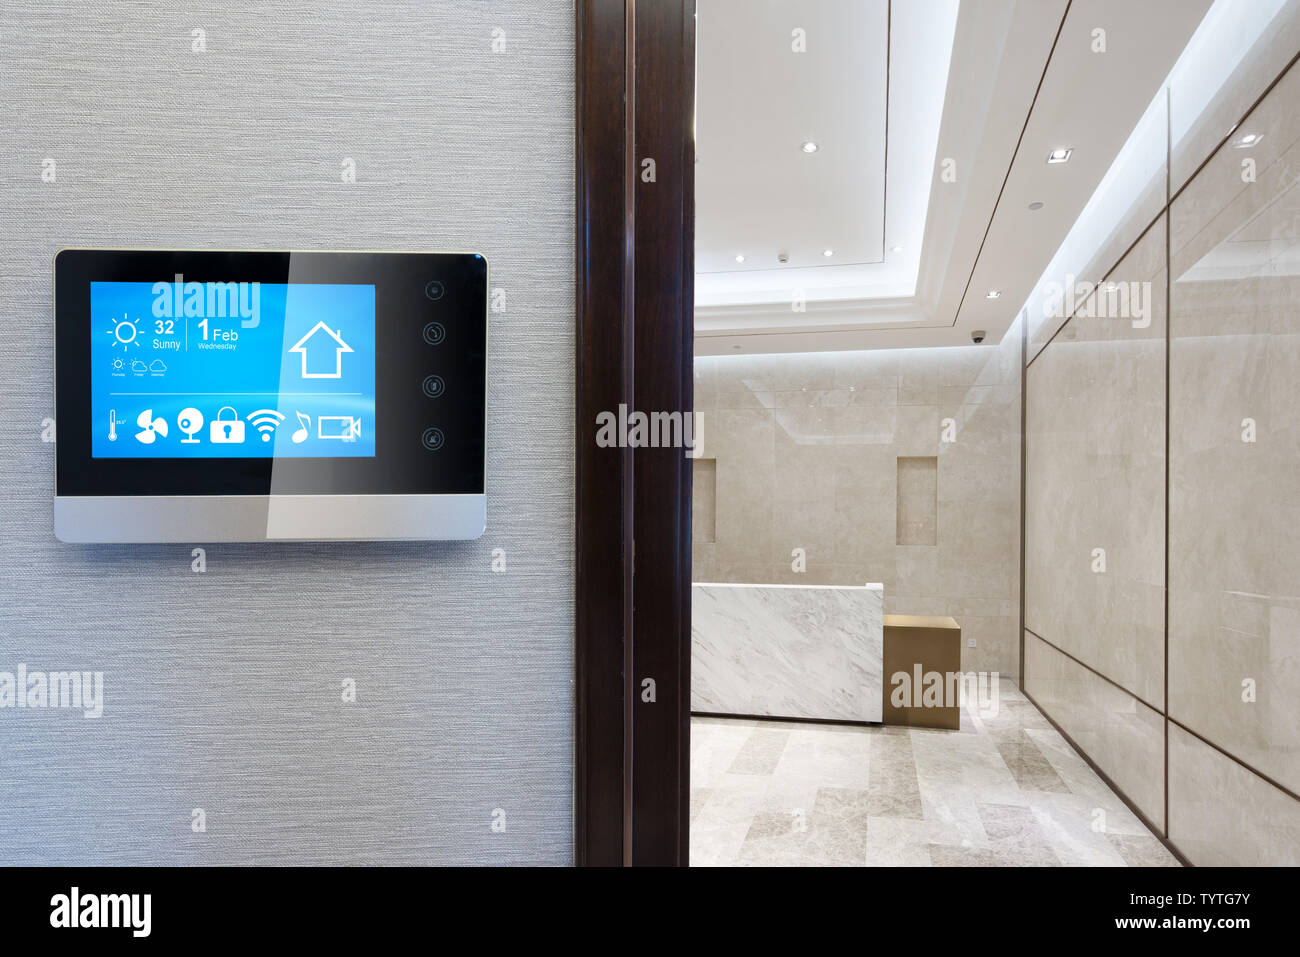 Smart Screen On Smart Home Icons In Modern Reception Desk Of